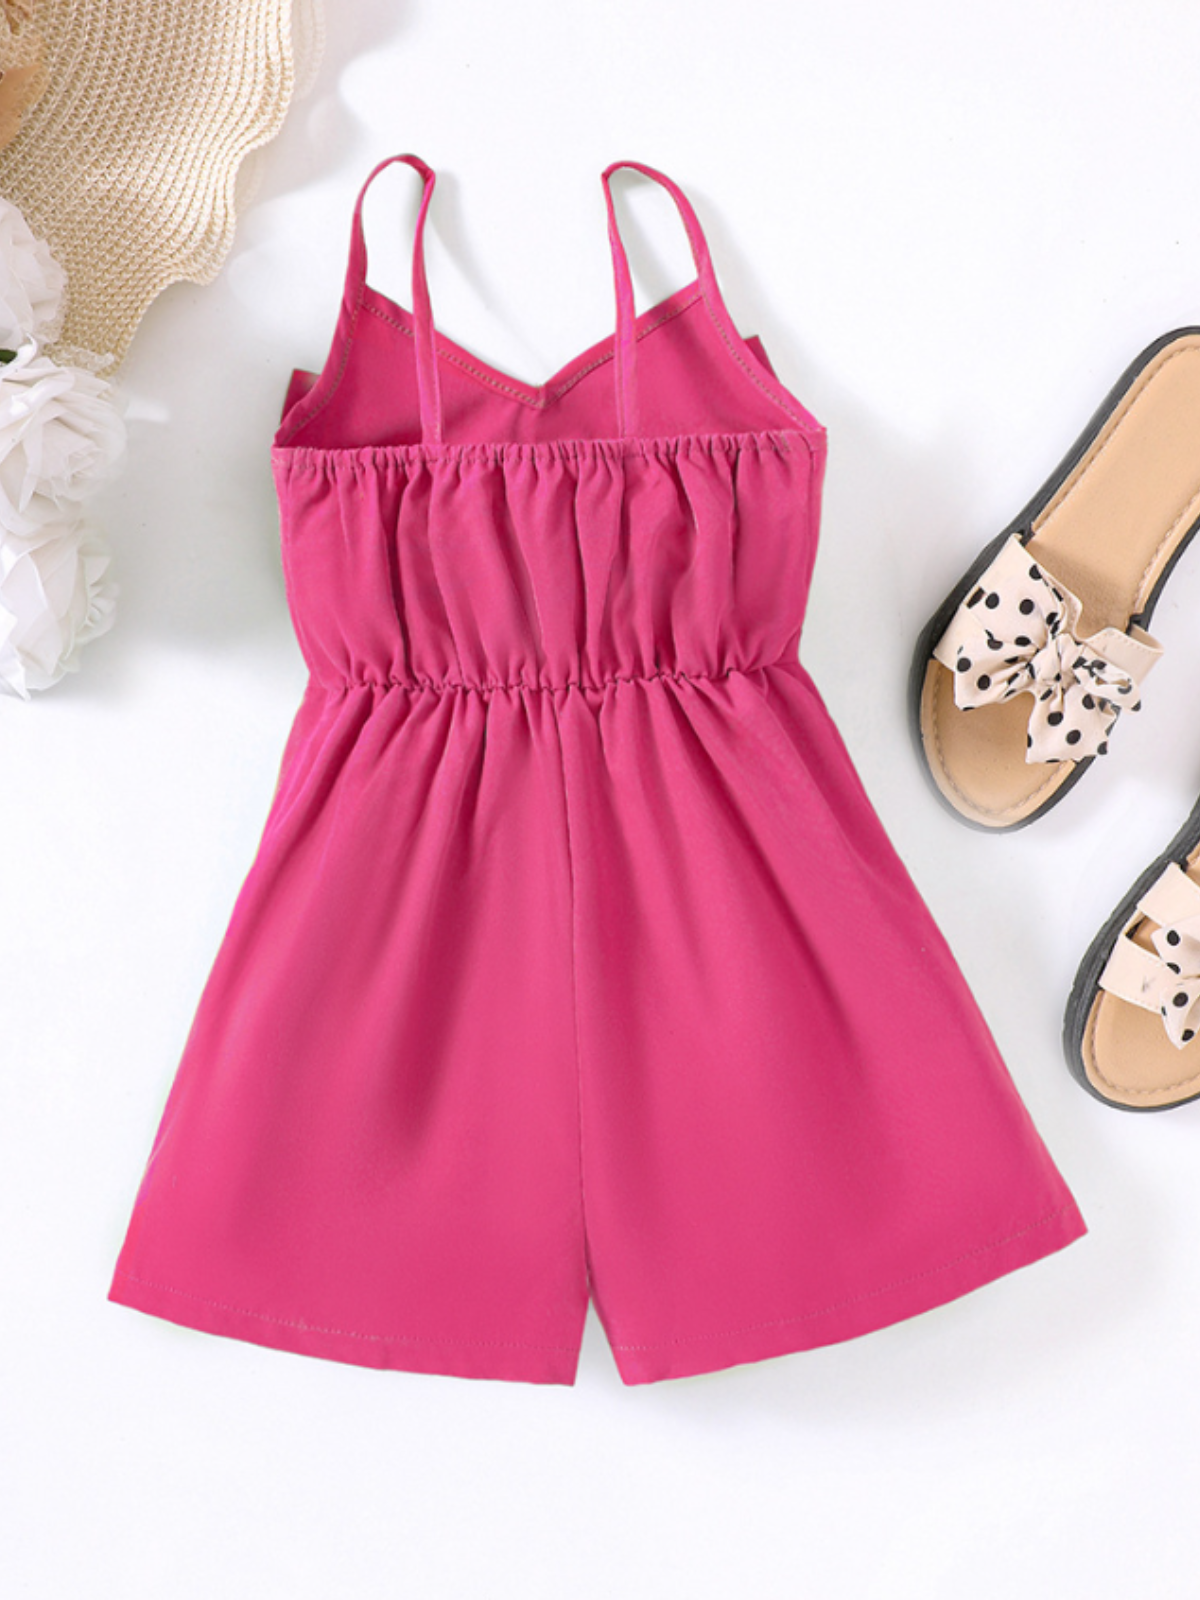 Mia Belle Girls Big Bow Romper | Girls Spring Outfits